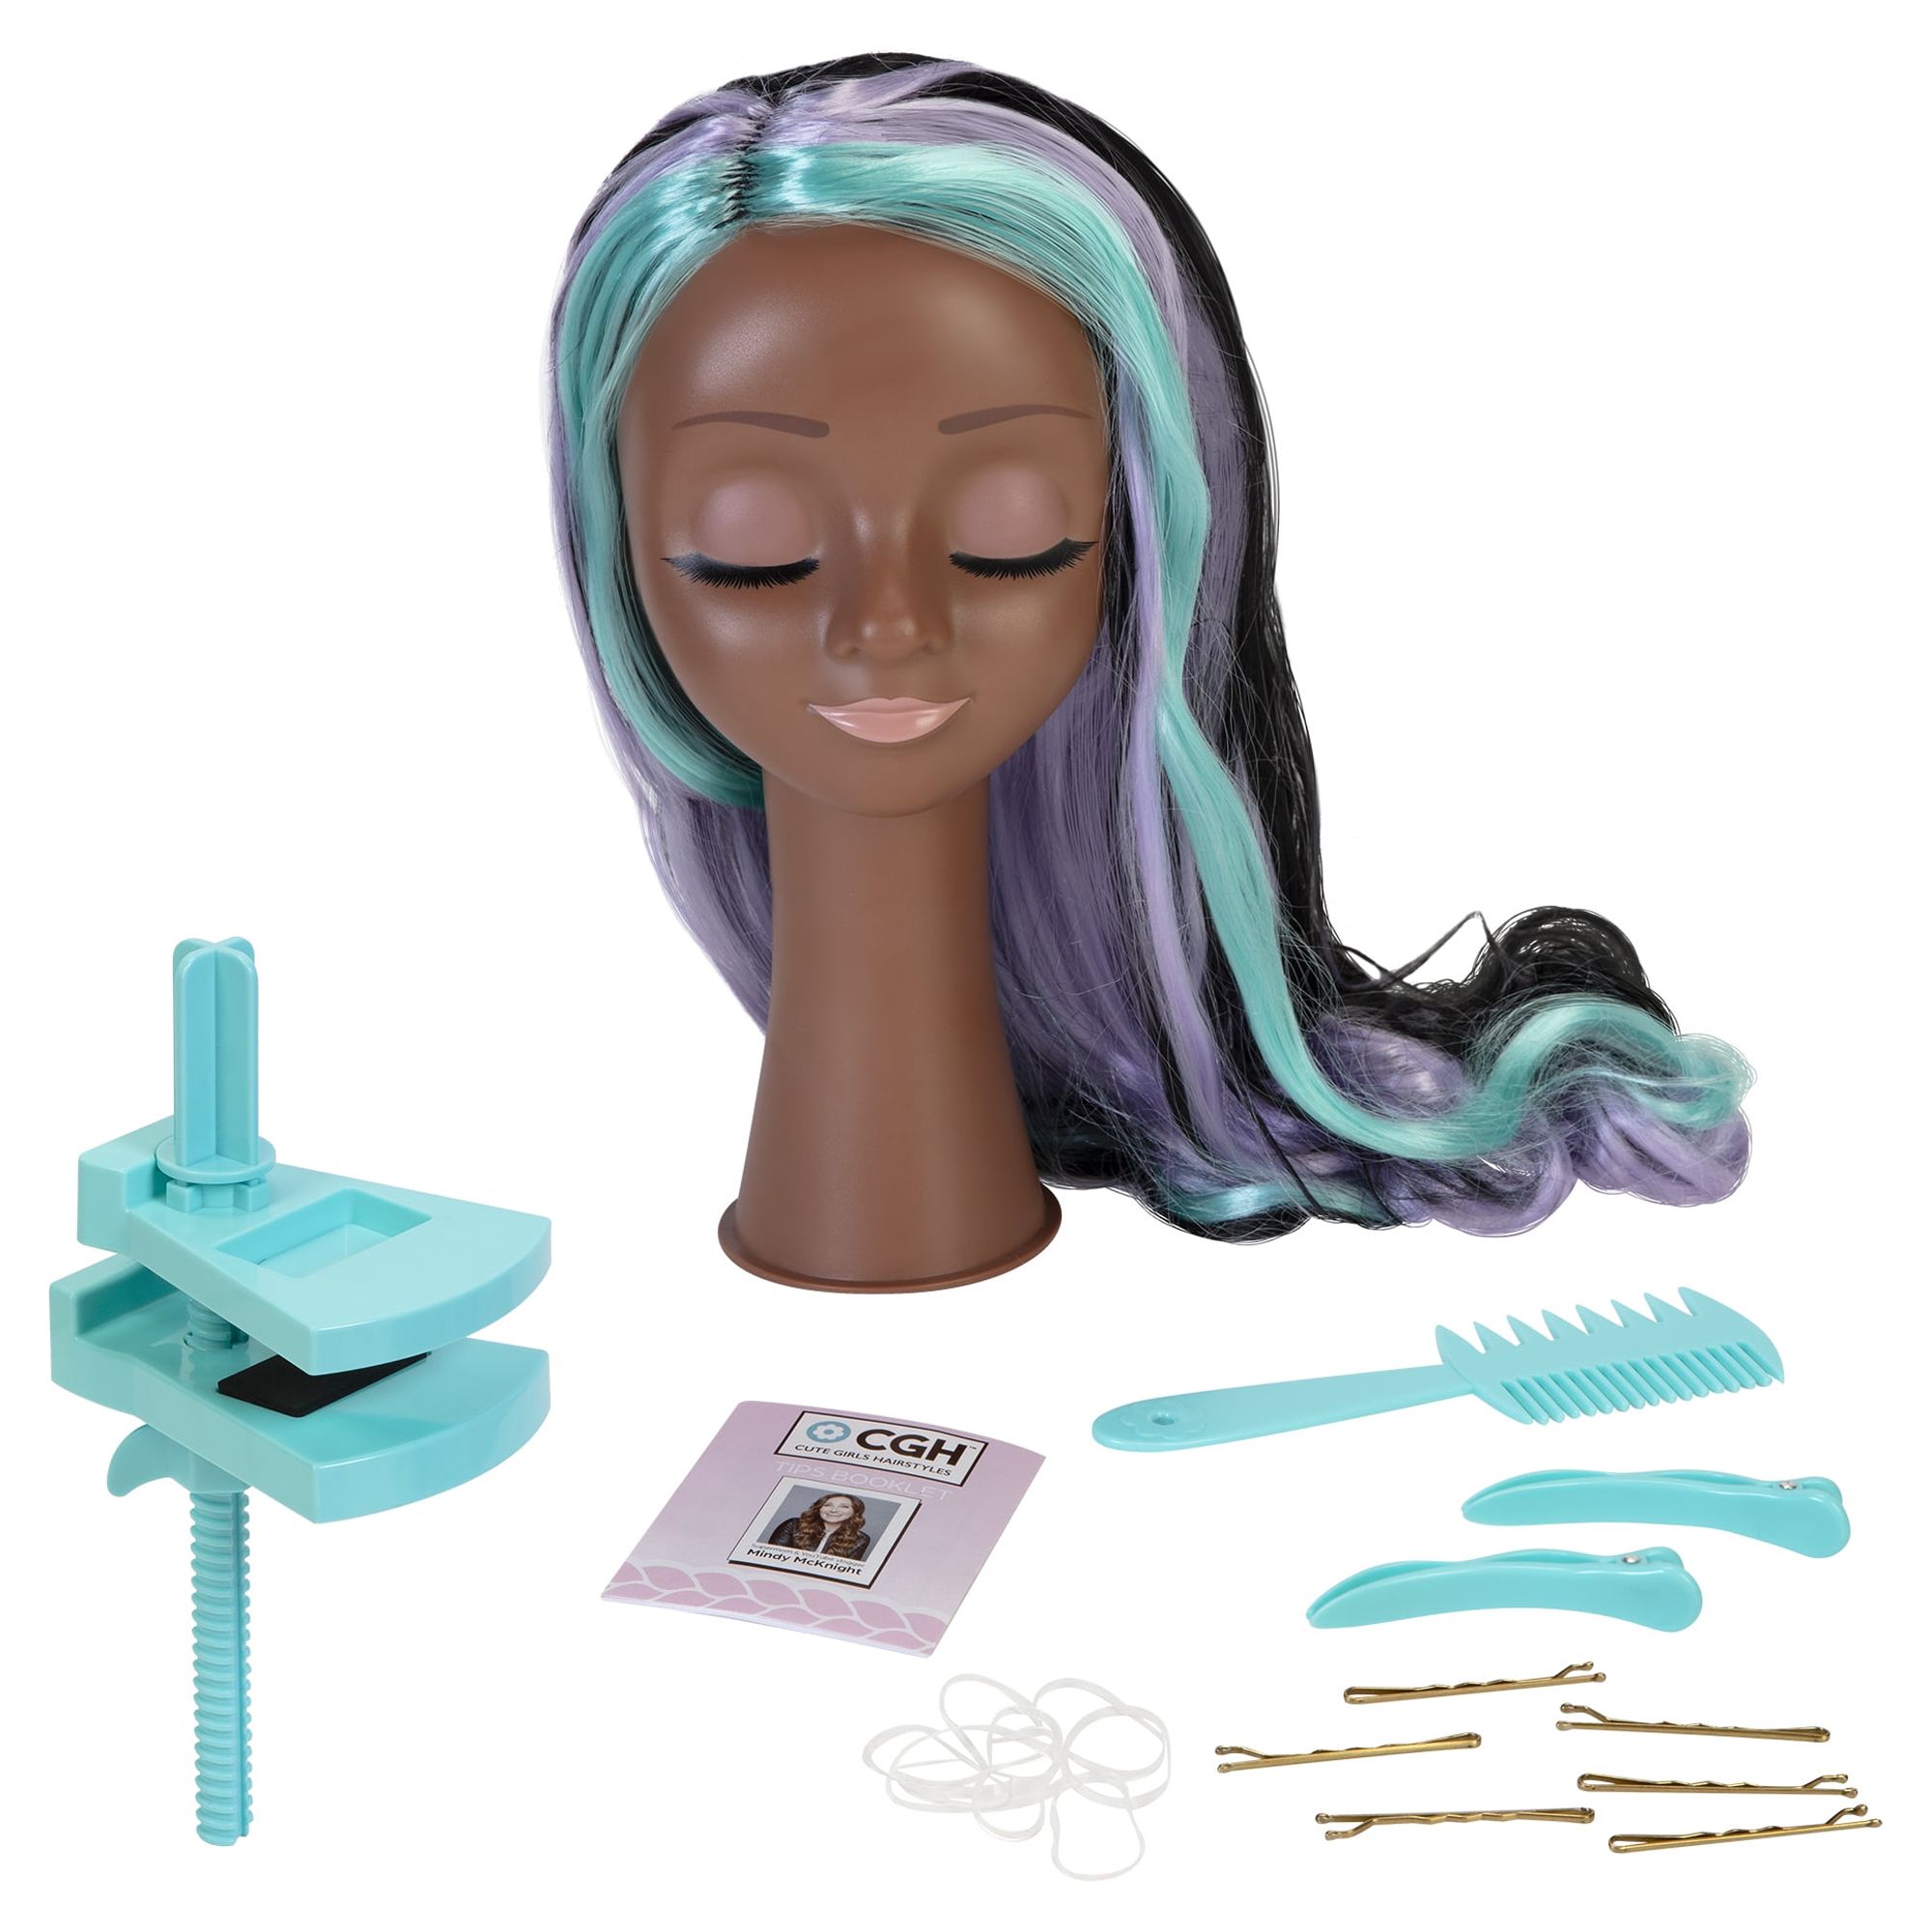 Cute Girls Hairstyles! Wig with Styling Head Doll Playset, 21 Pieces - image 1 of 2